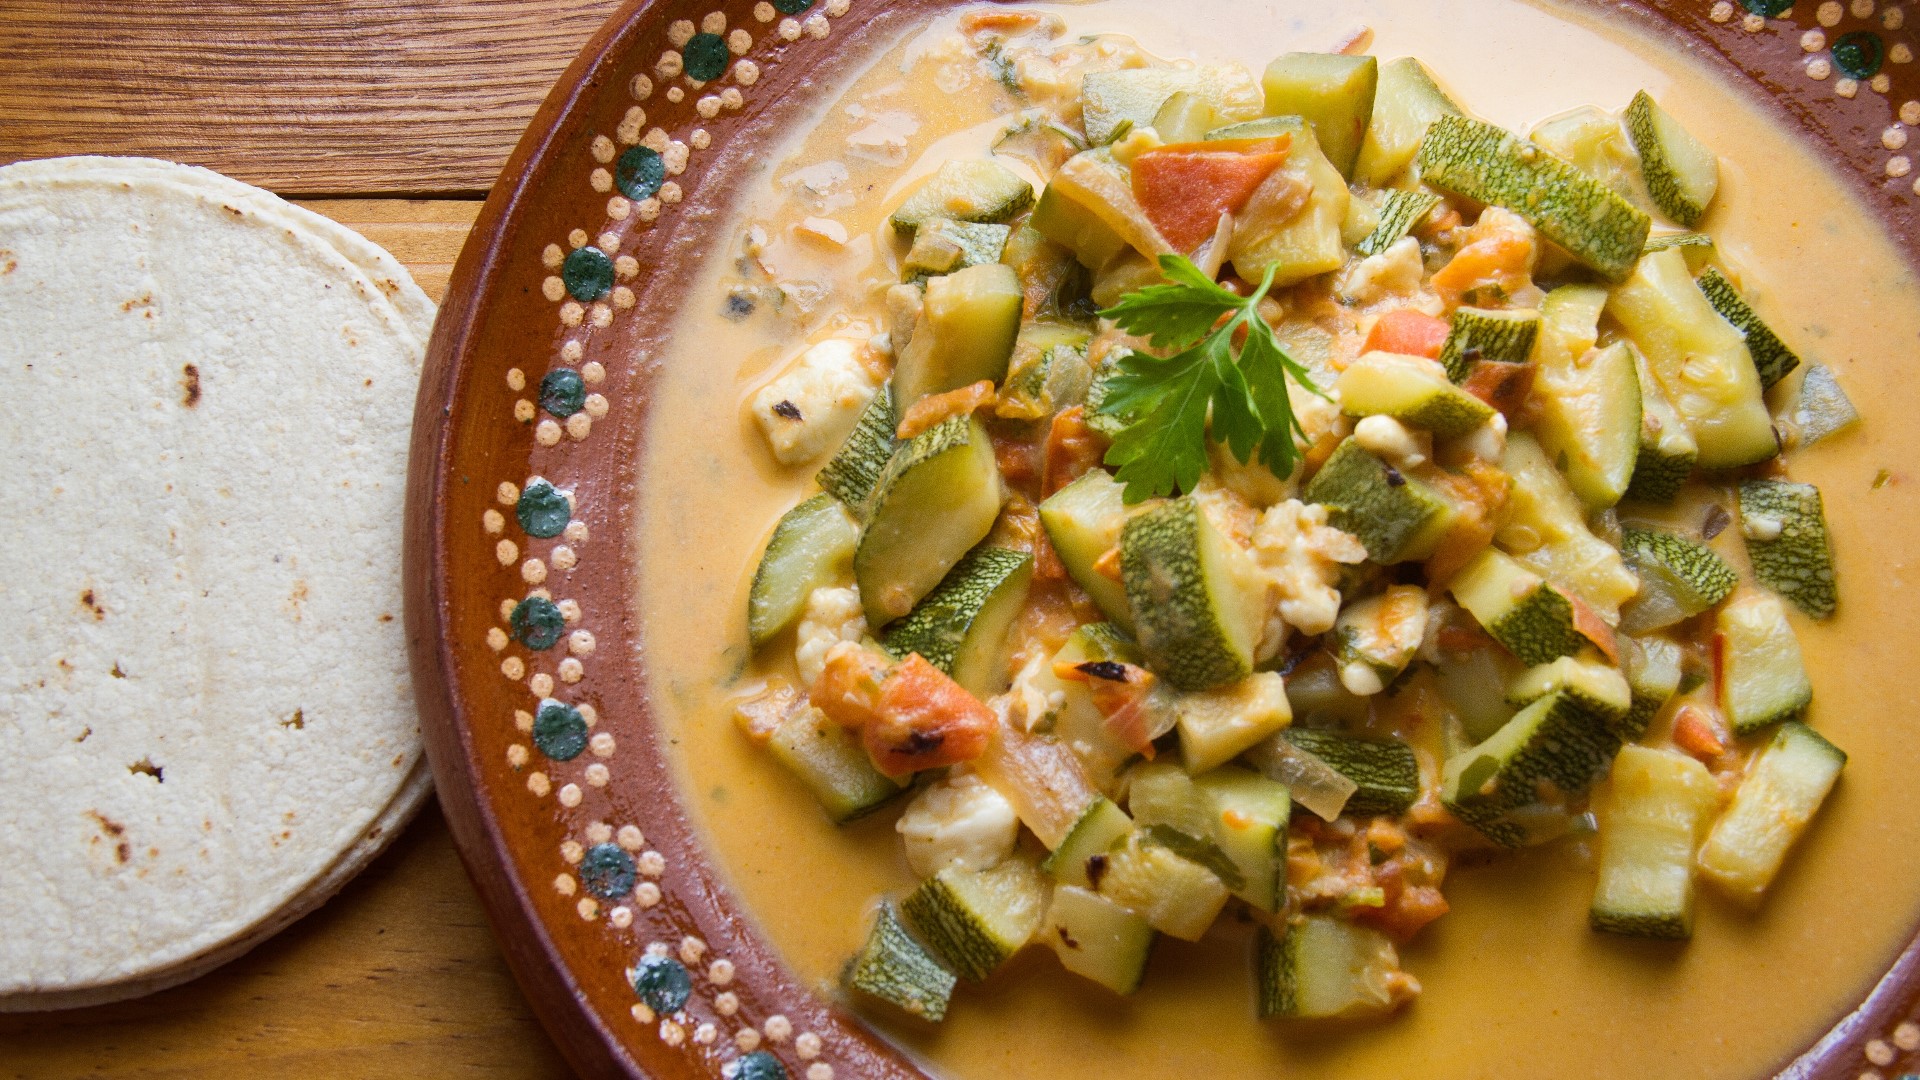 Calabacitas is a Mexican dish made from sauteed zucchini or squash, corn, tomatoes and peppers.